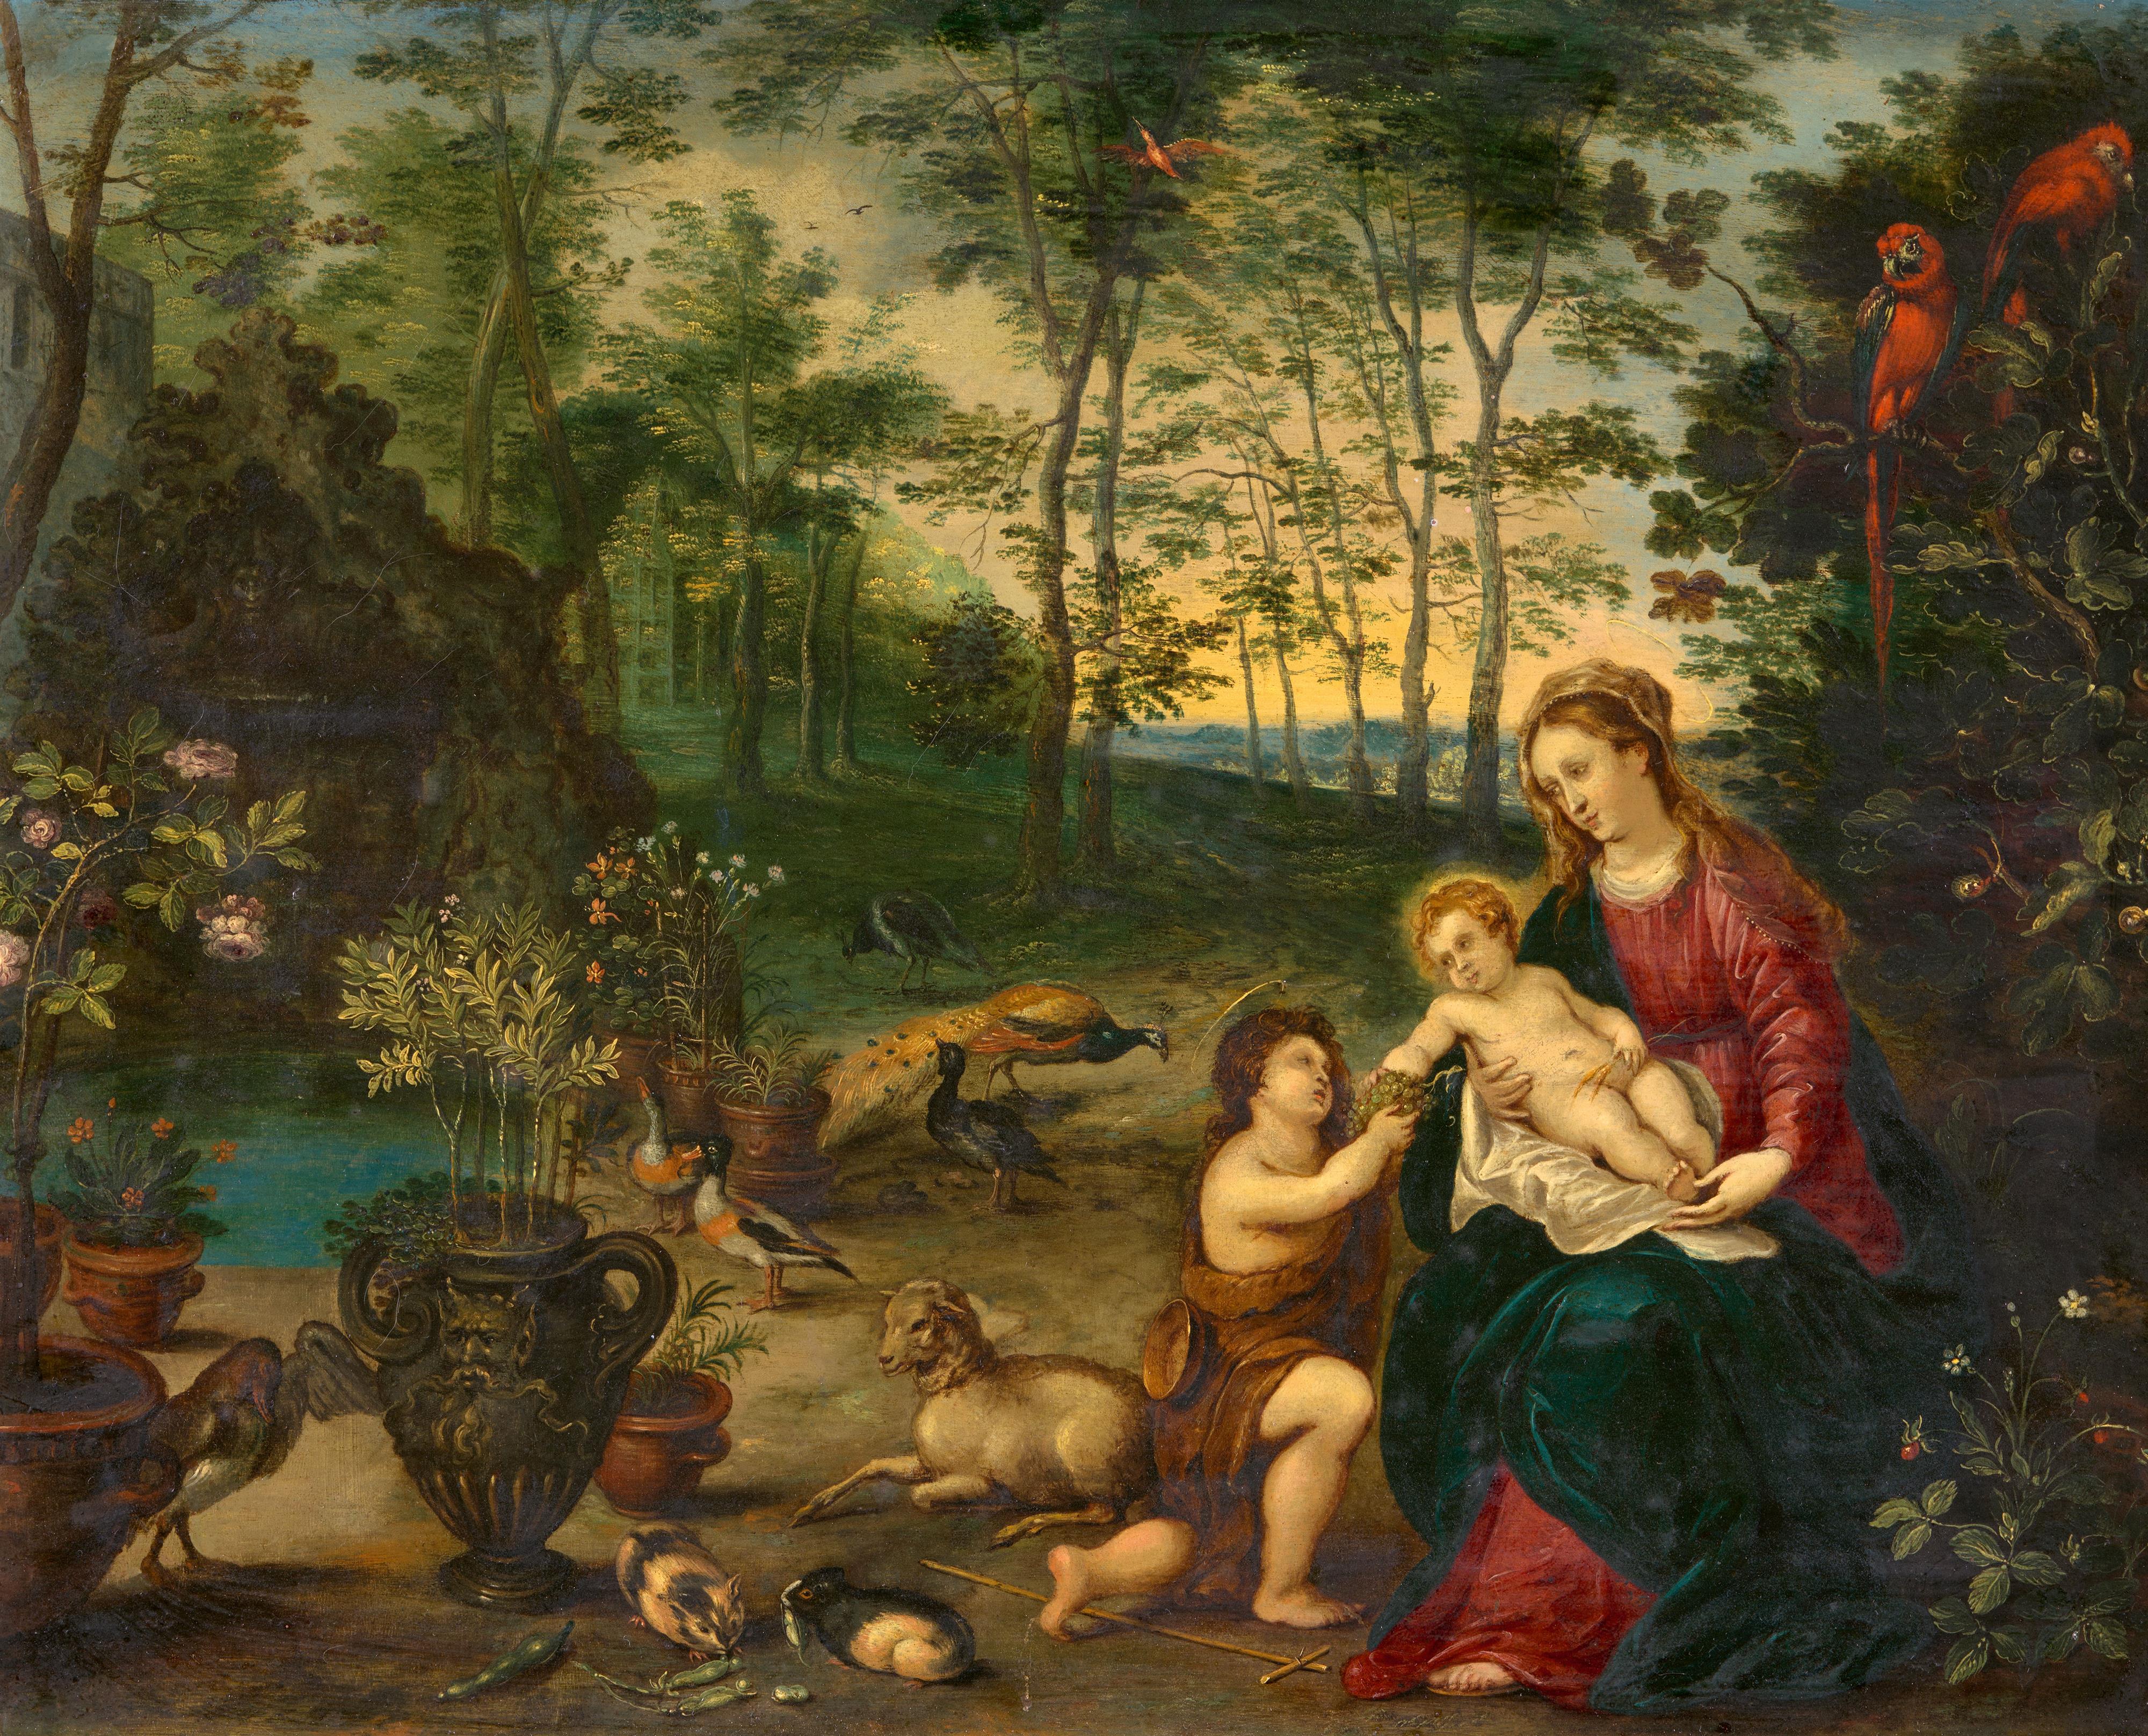 Jan Brueghel the Younger, attributed to
Pieter van Avont, attributed to - The Virgin and Child with the Infant Saint John in a Landscape - image-1